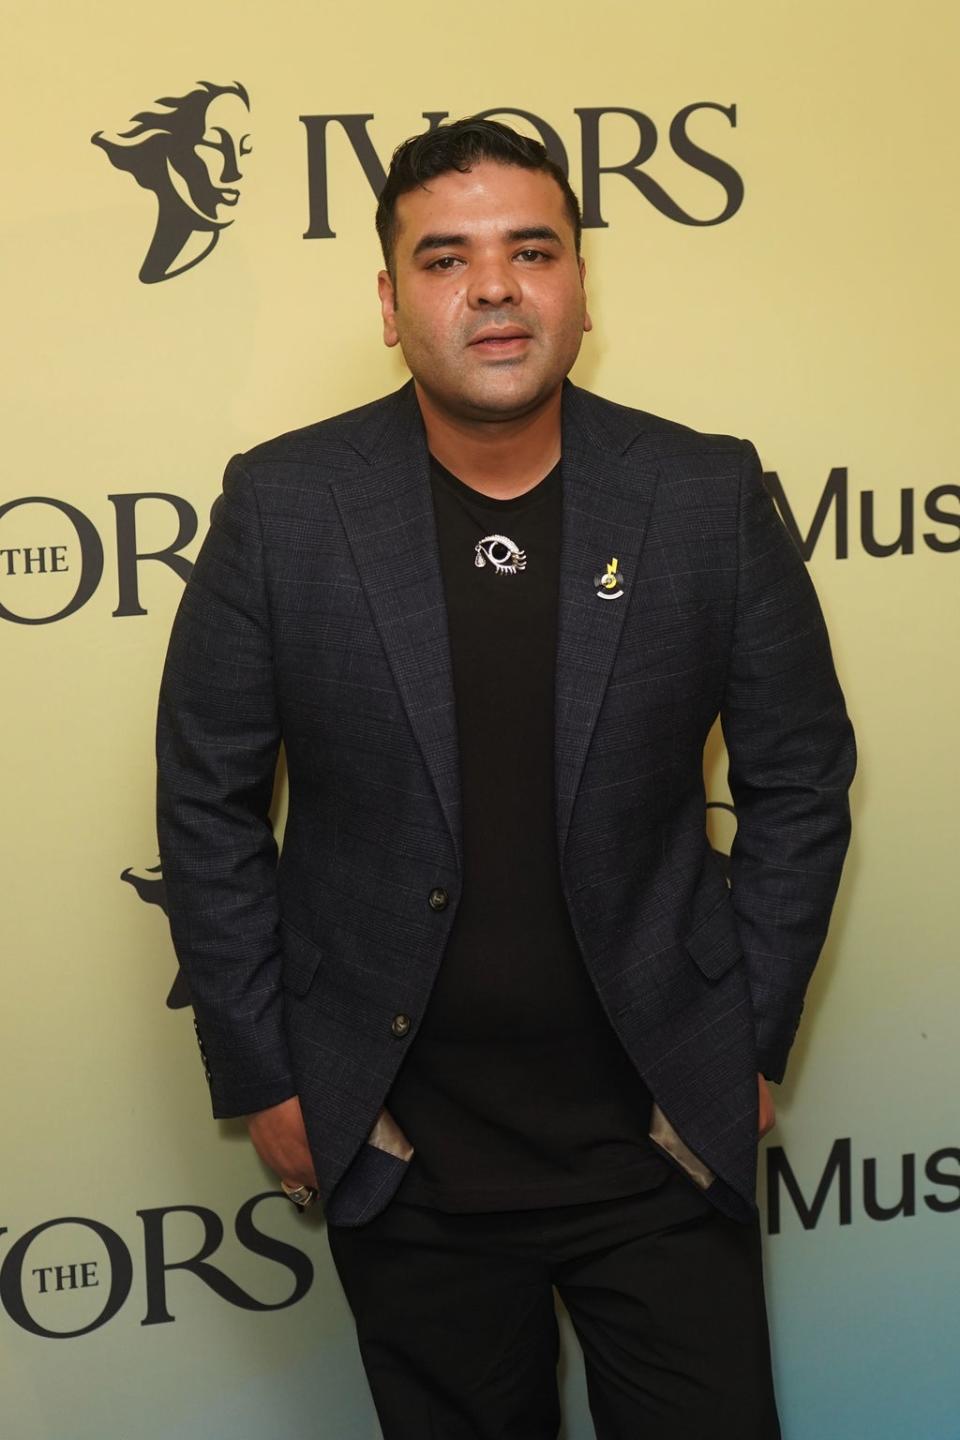 British DJ, record producer Shahid Khan, better known by his stage name Naughty Boy, during the Annual Ivor Novello Songwriting Awards at Grosvenor House in London (PA)